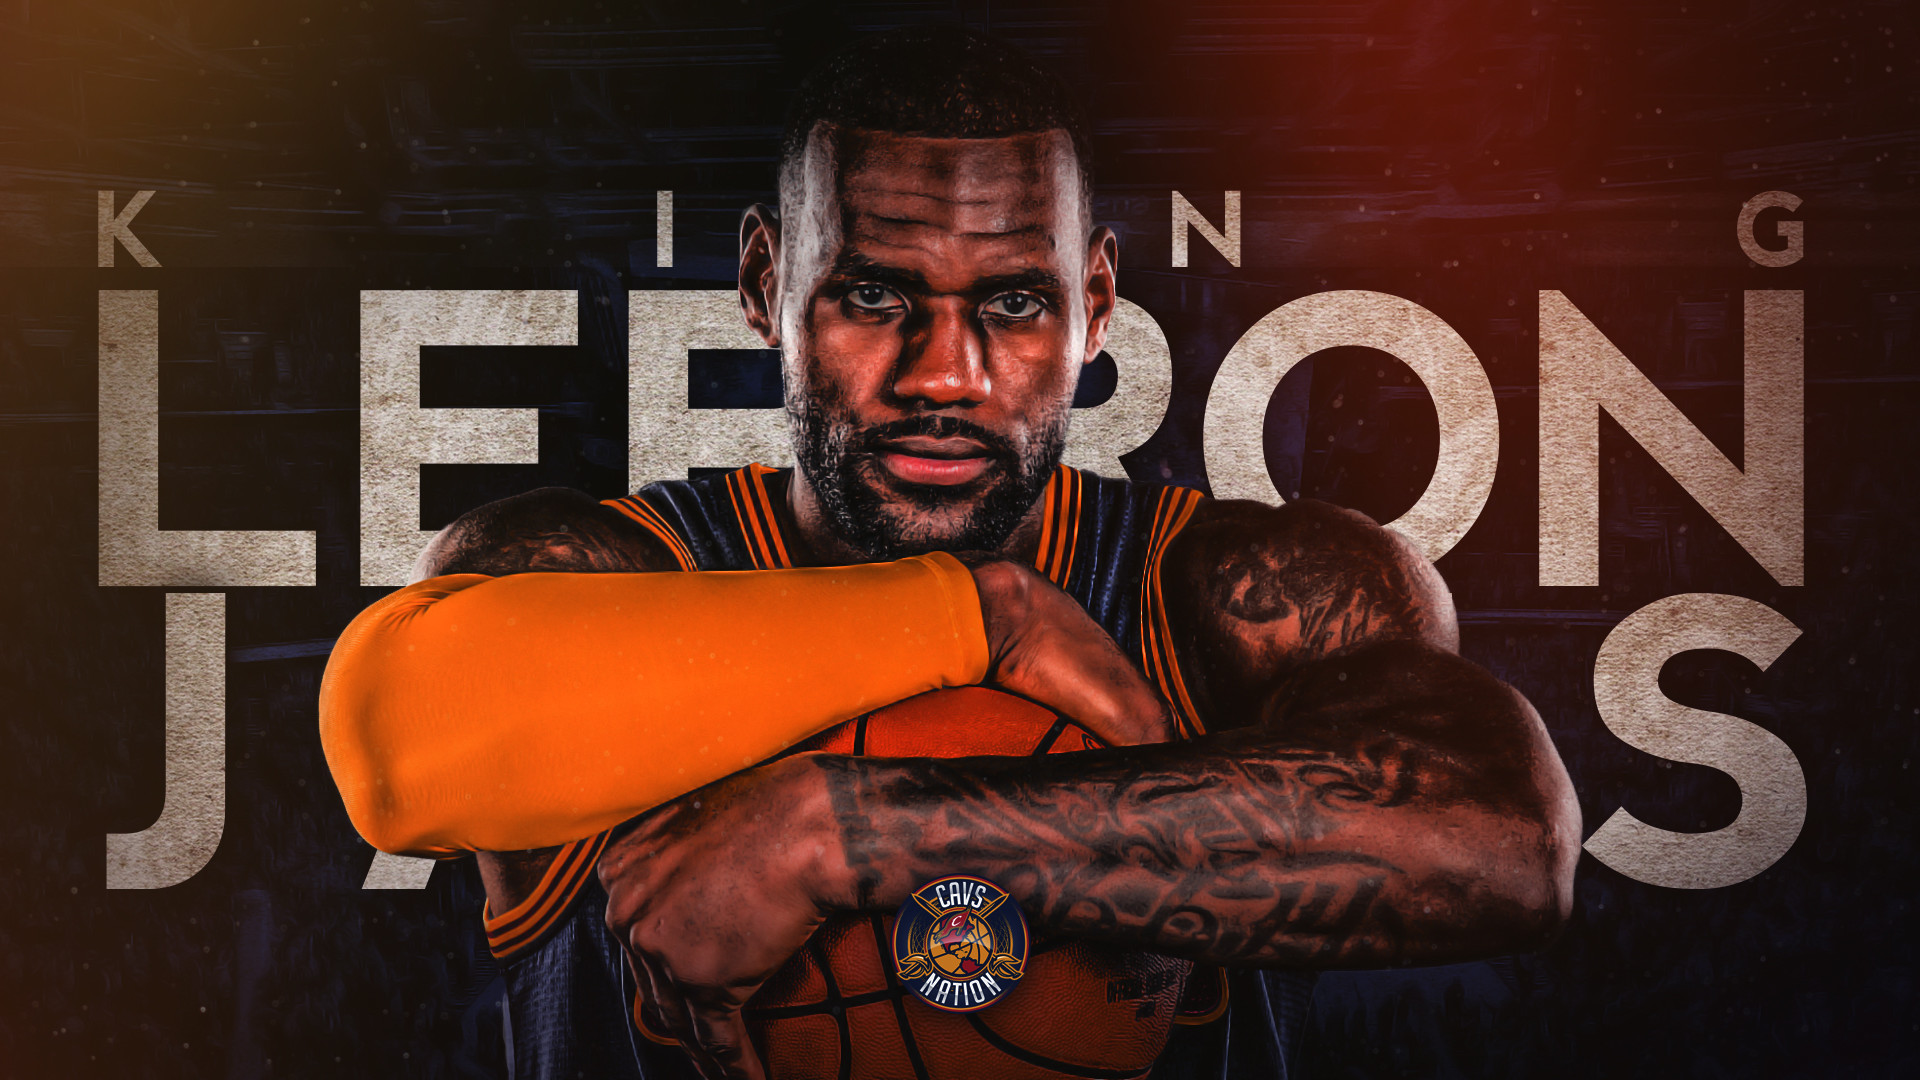 1920x1080 [HD] DOWNLOAD our King James wallpapers!